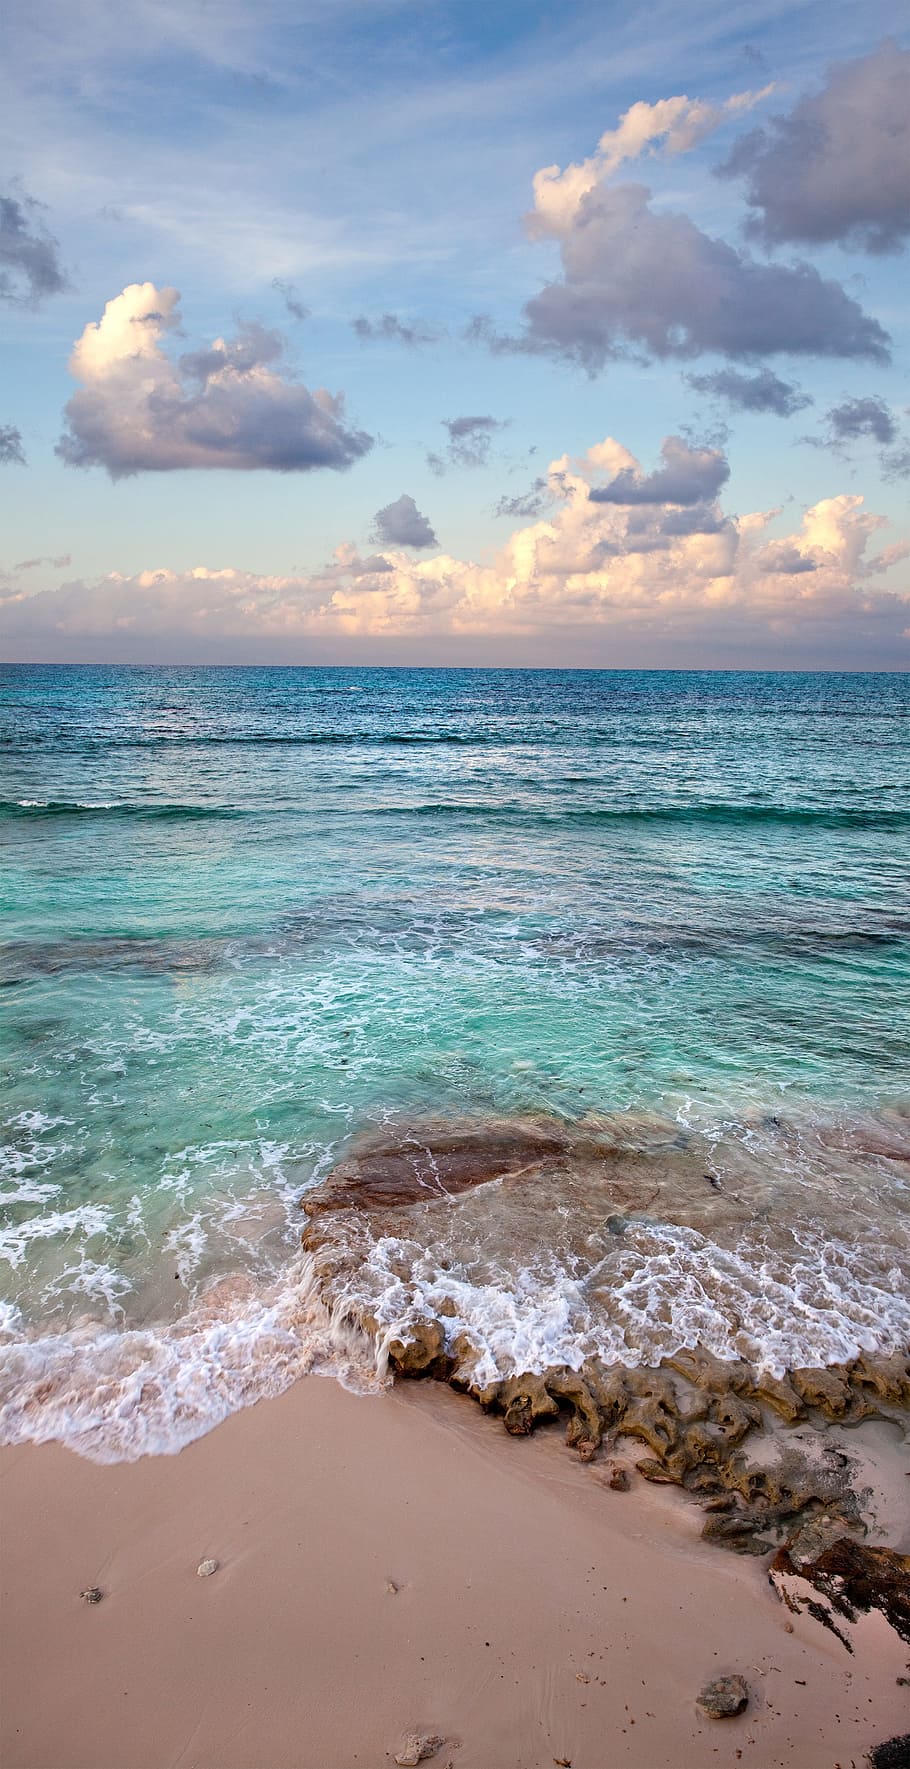 teal seawave under blue and white sky, sunset, beach, caribbean